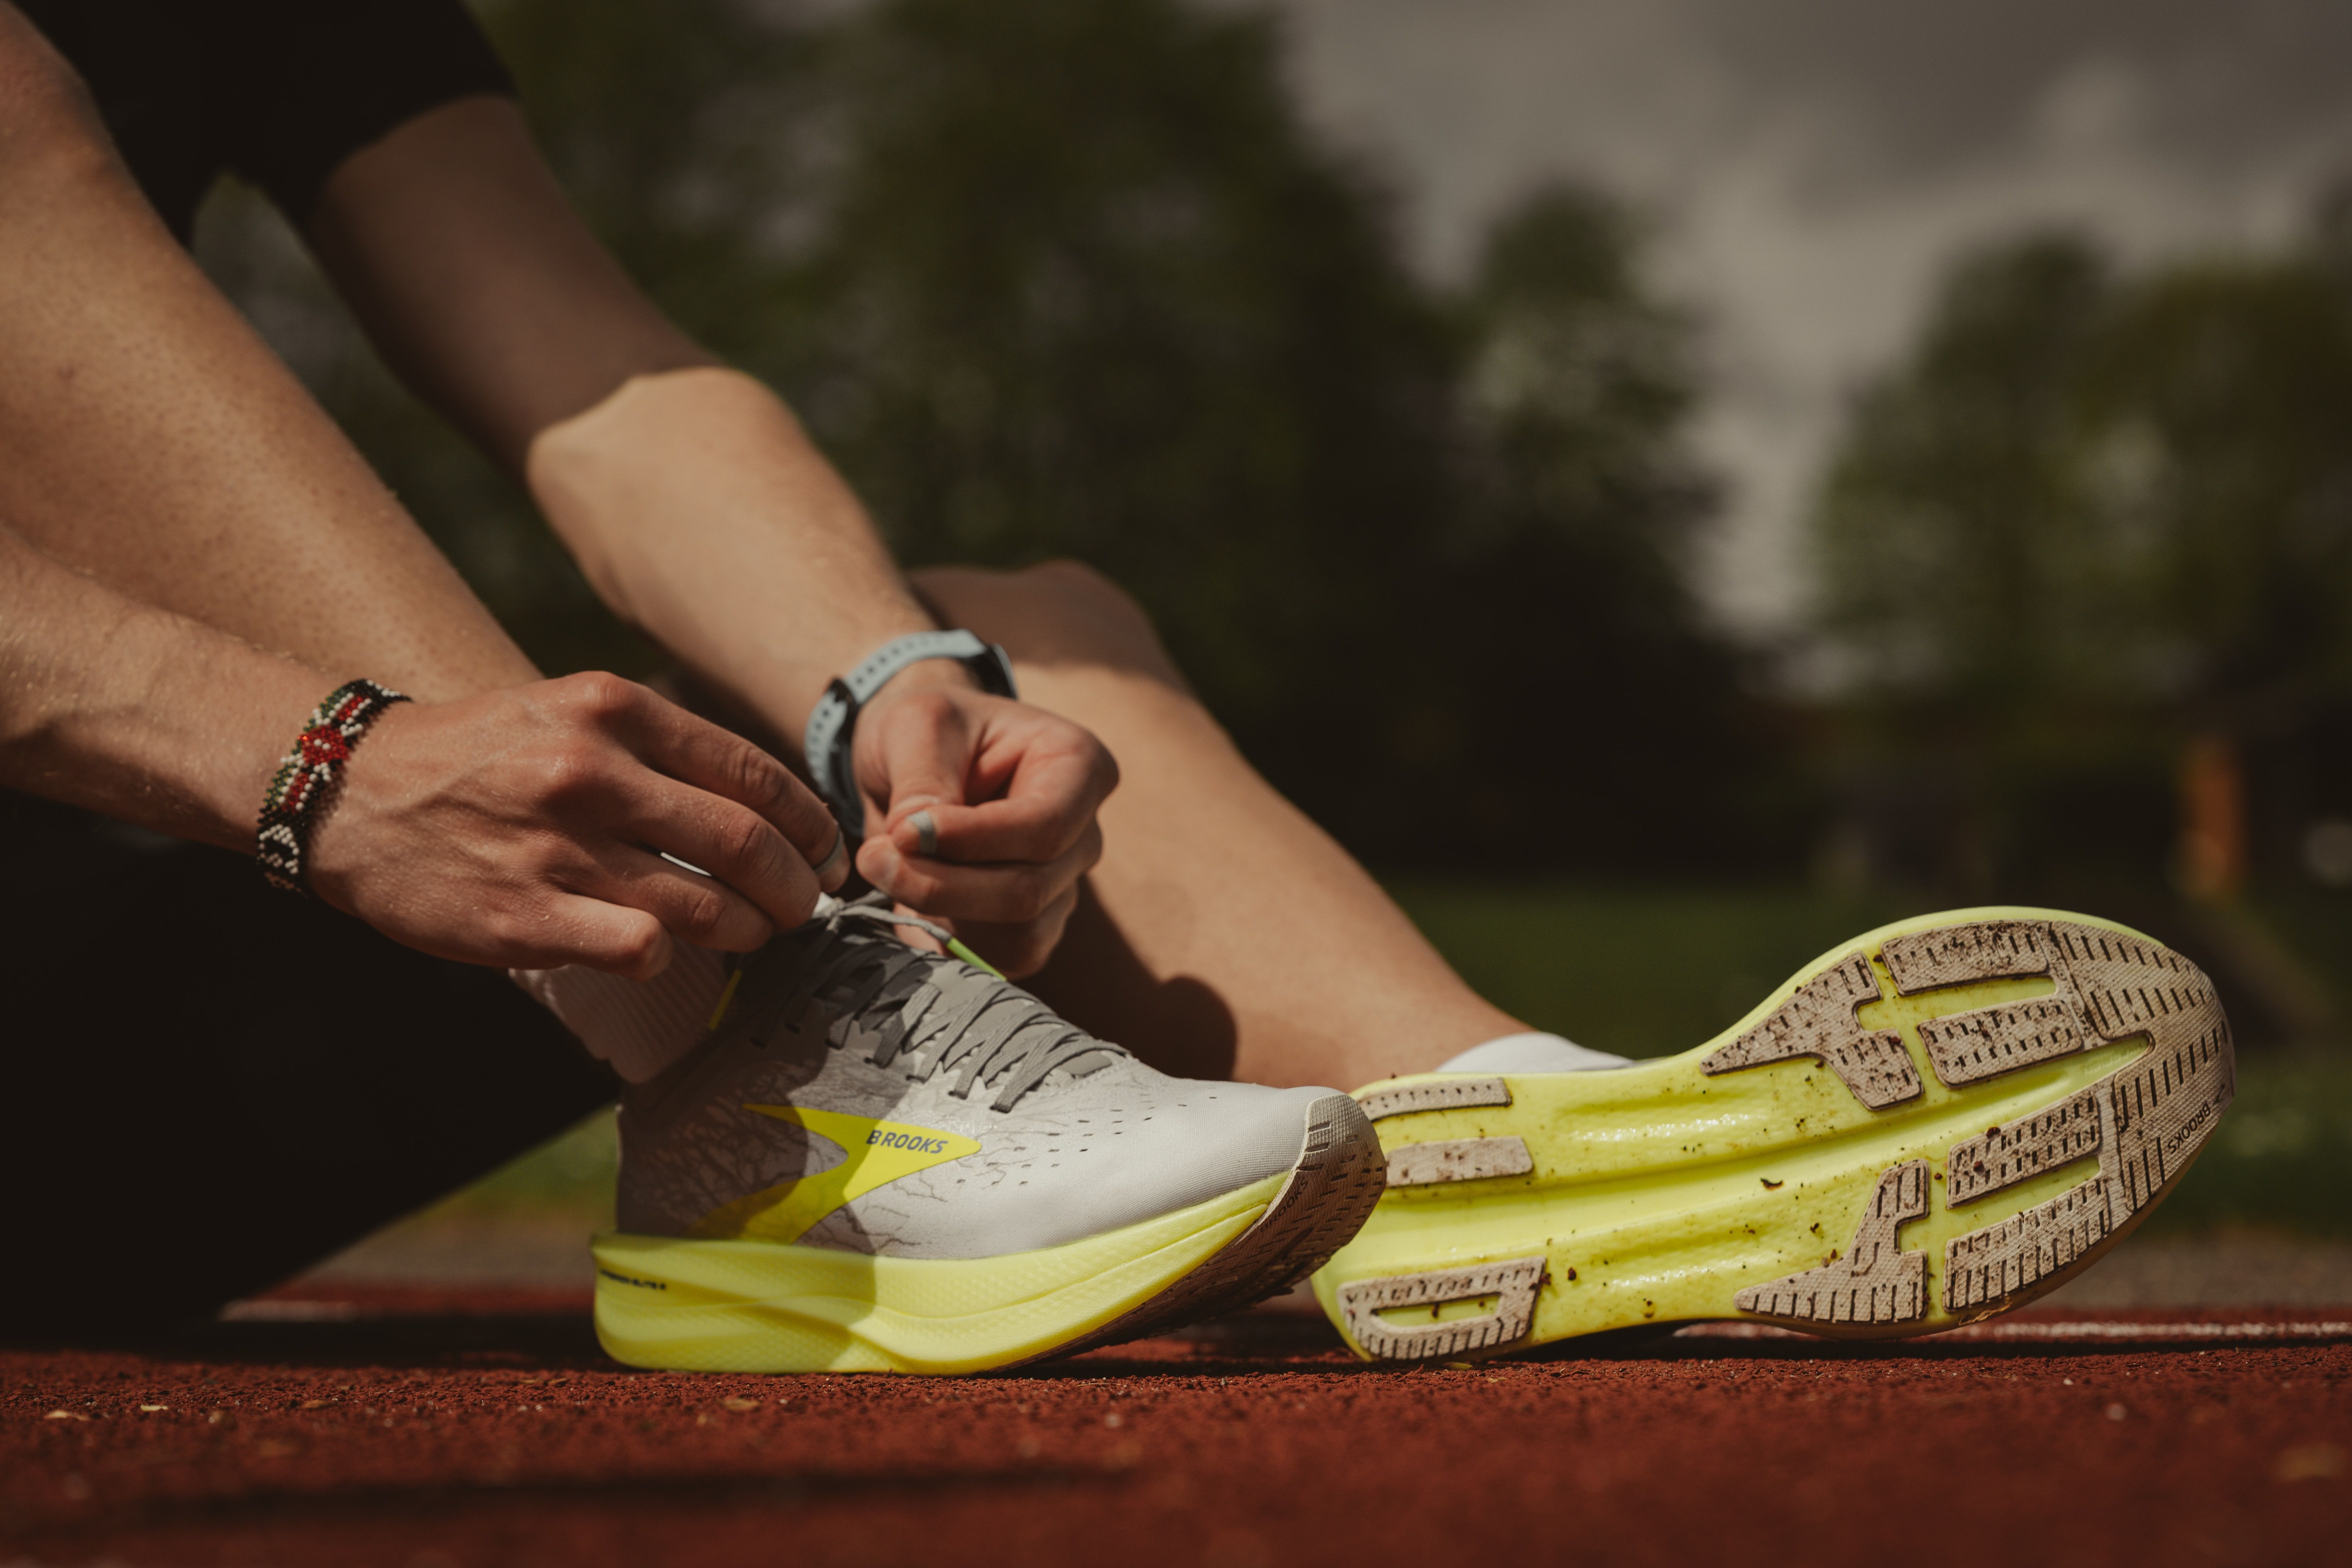 A pair of hands lacing up running shoes outside